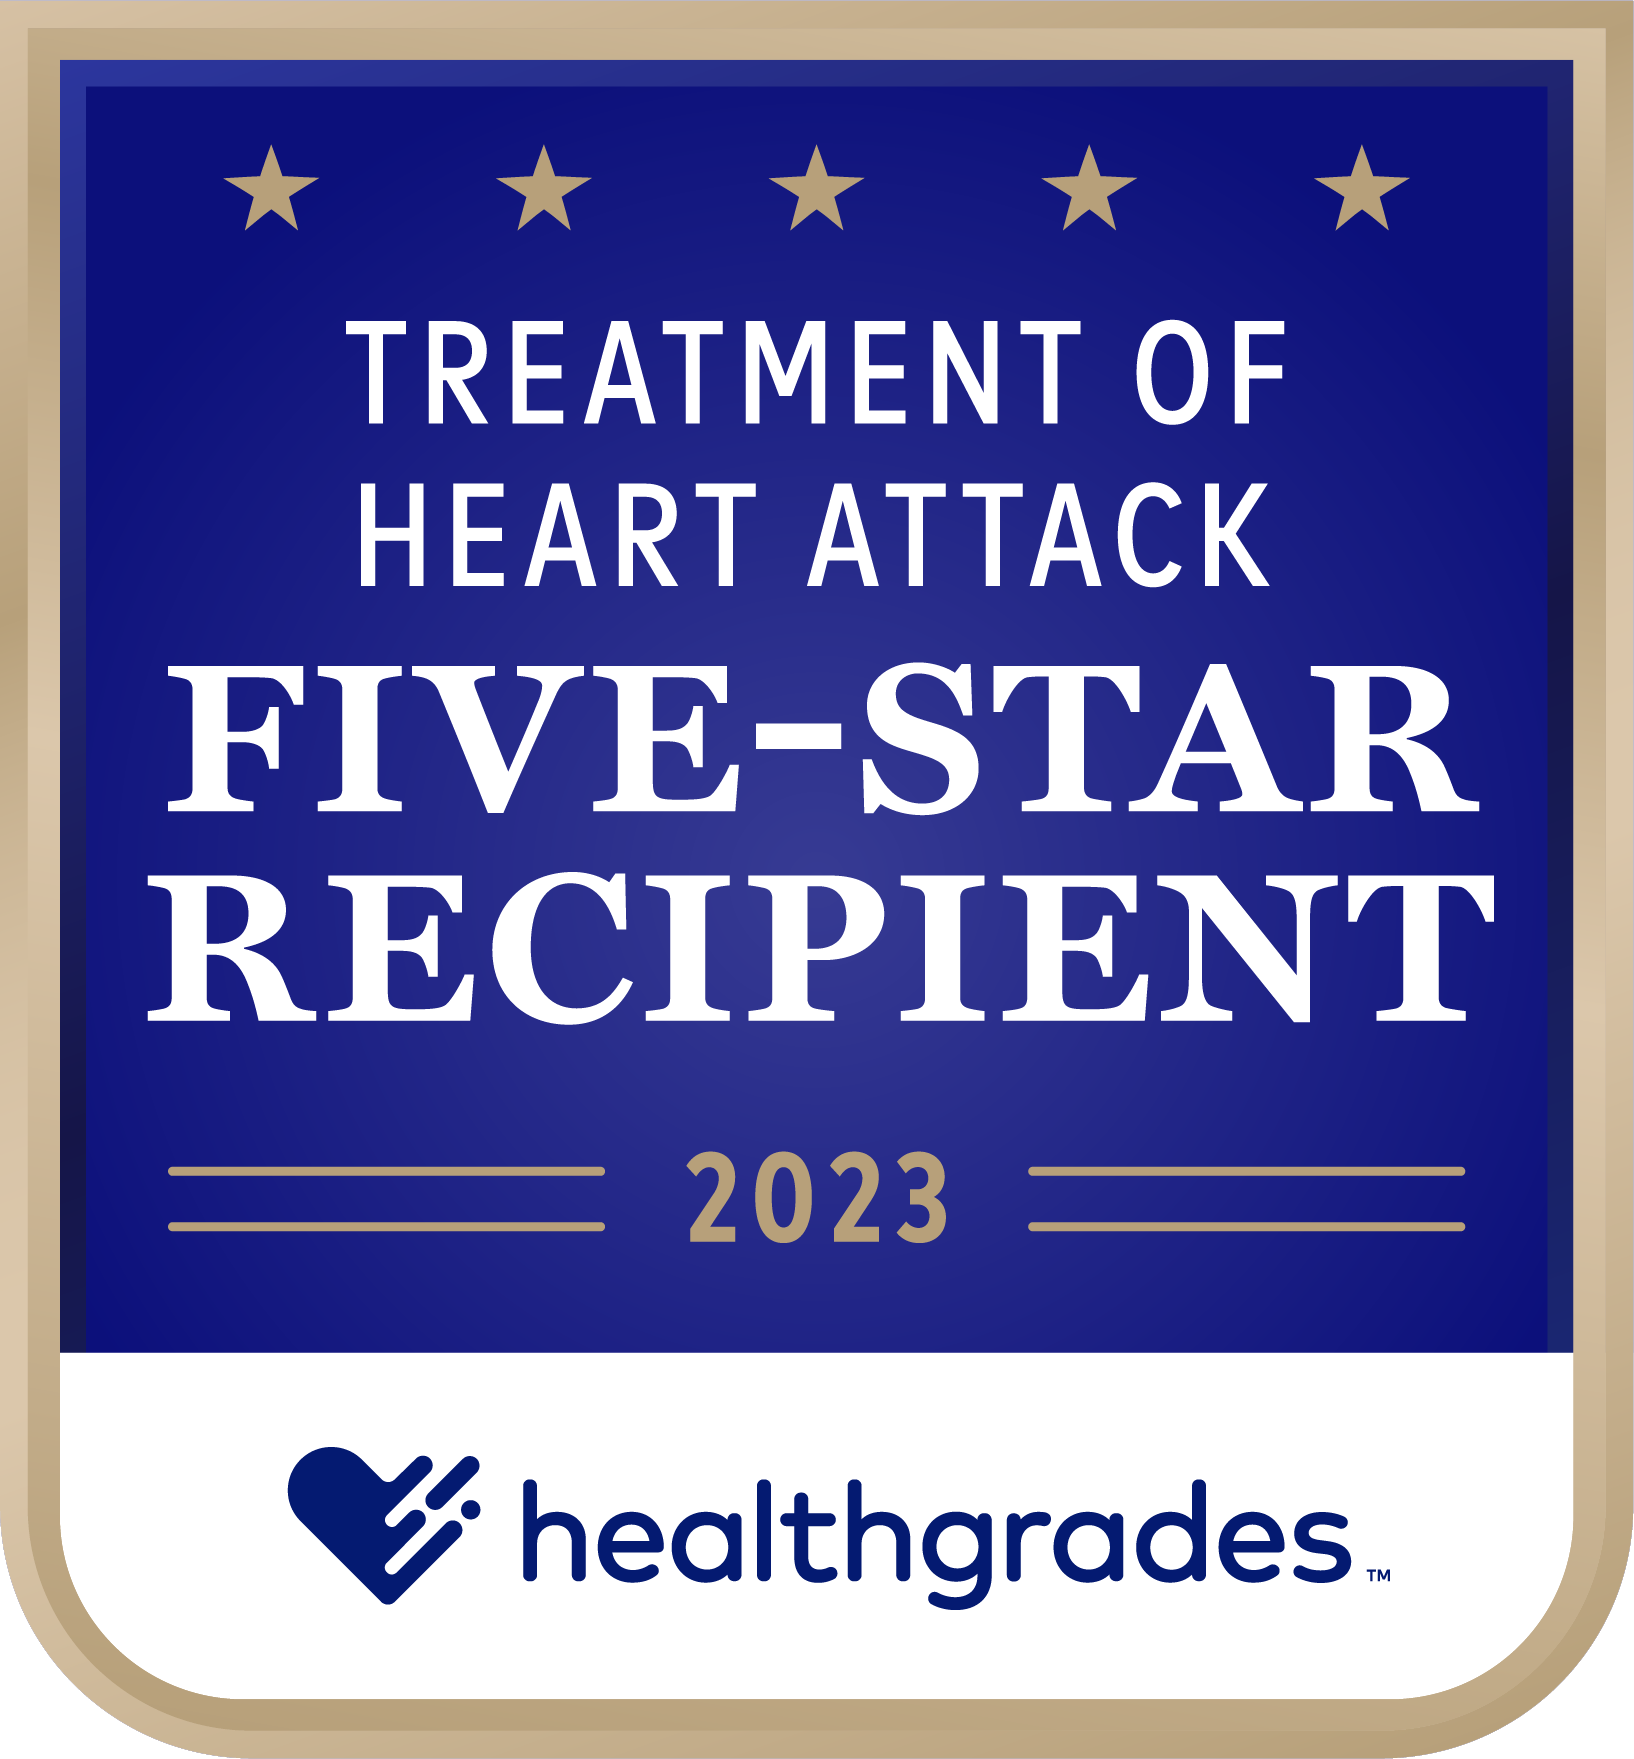 BayCare was a five-star recipient for treatment of a heart attack from 2023 healthgrades. 